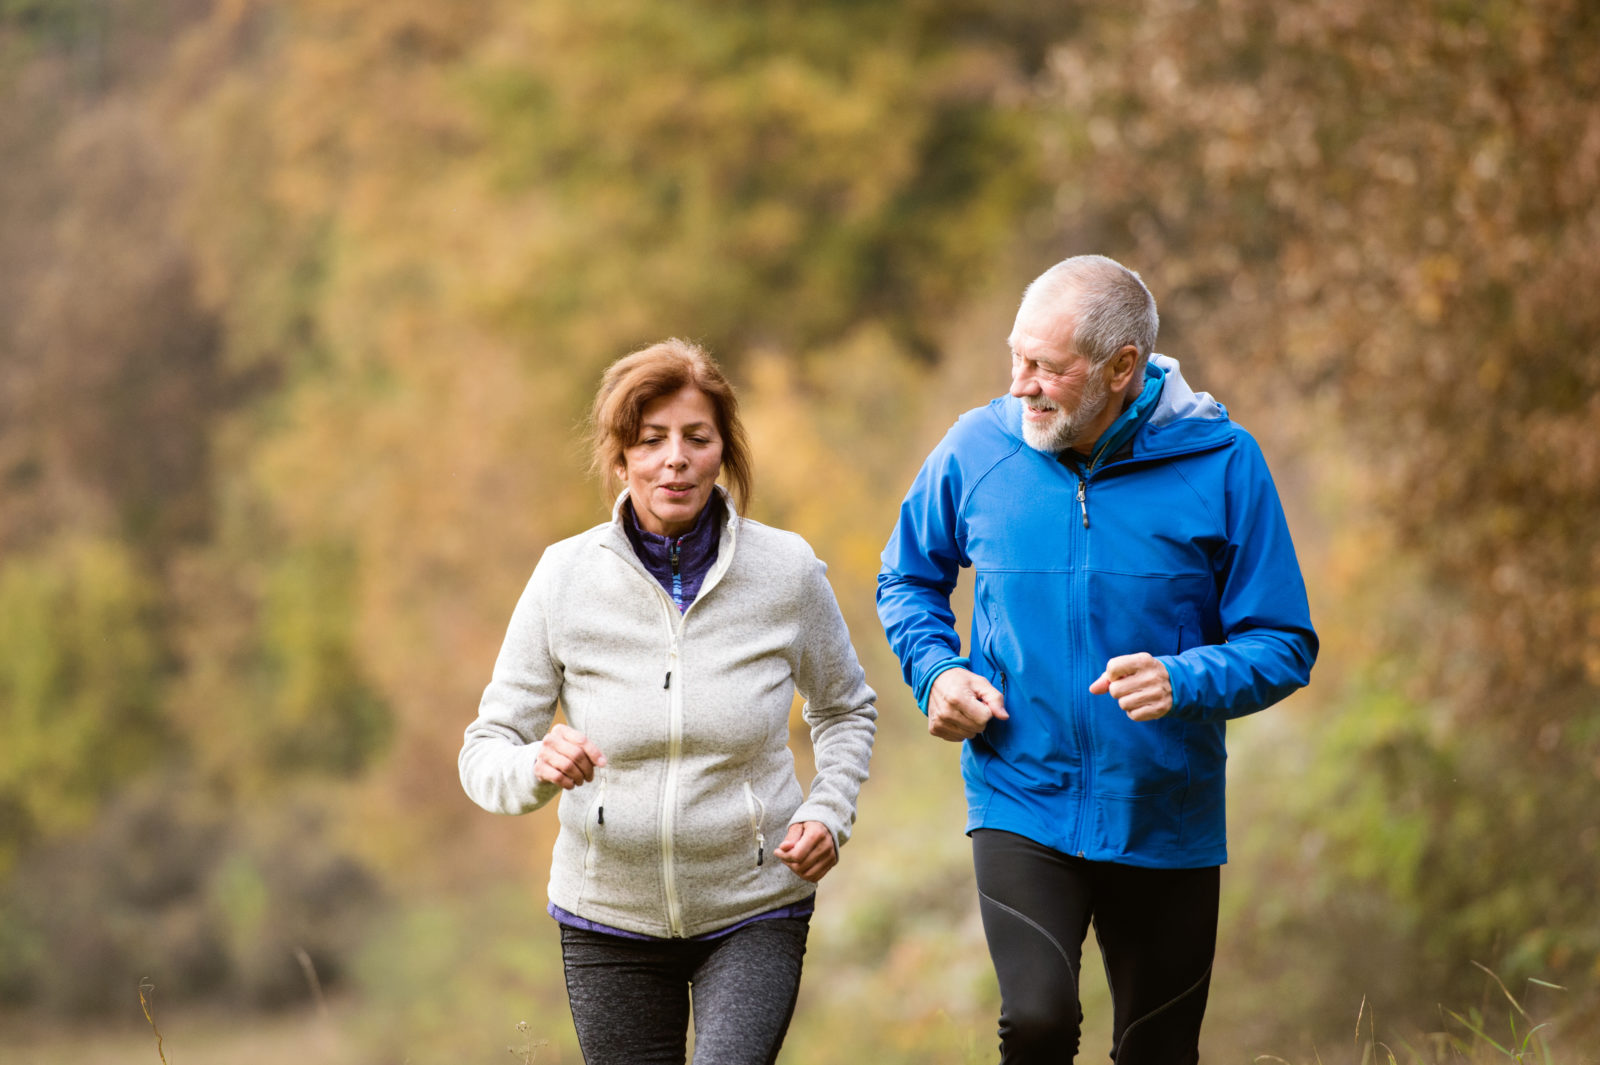 Running marathons can reduce your cardiovascular age